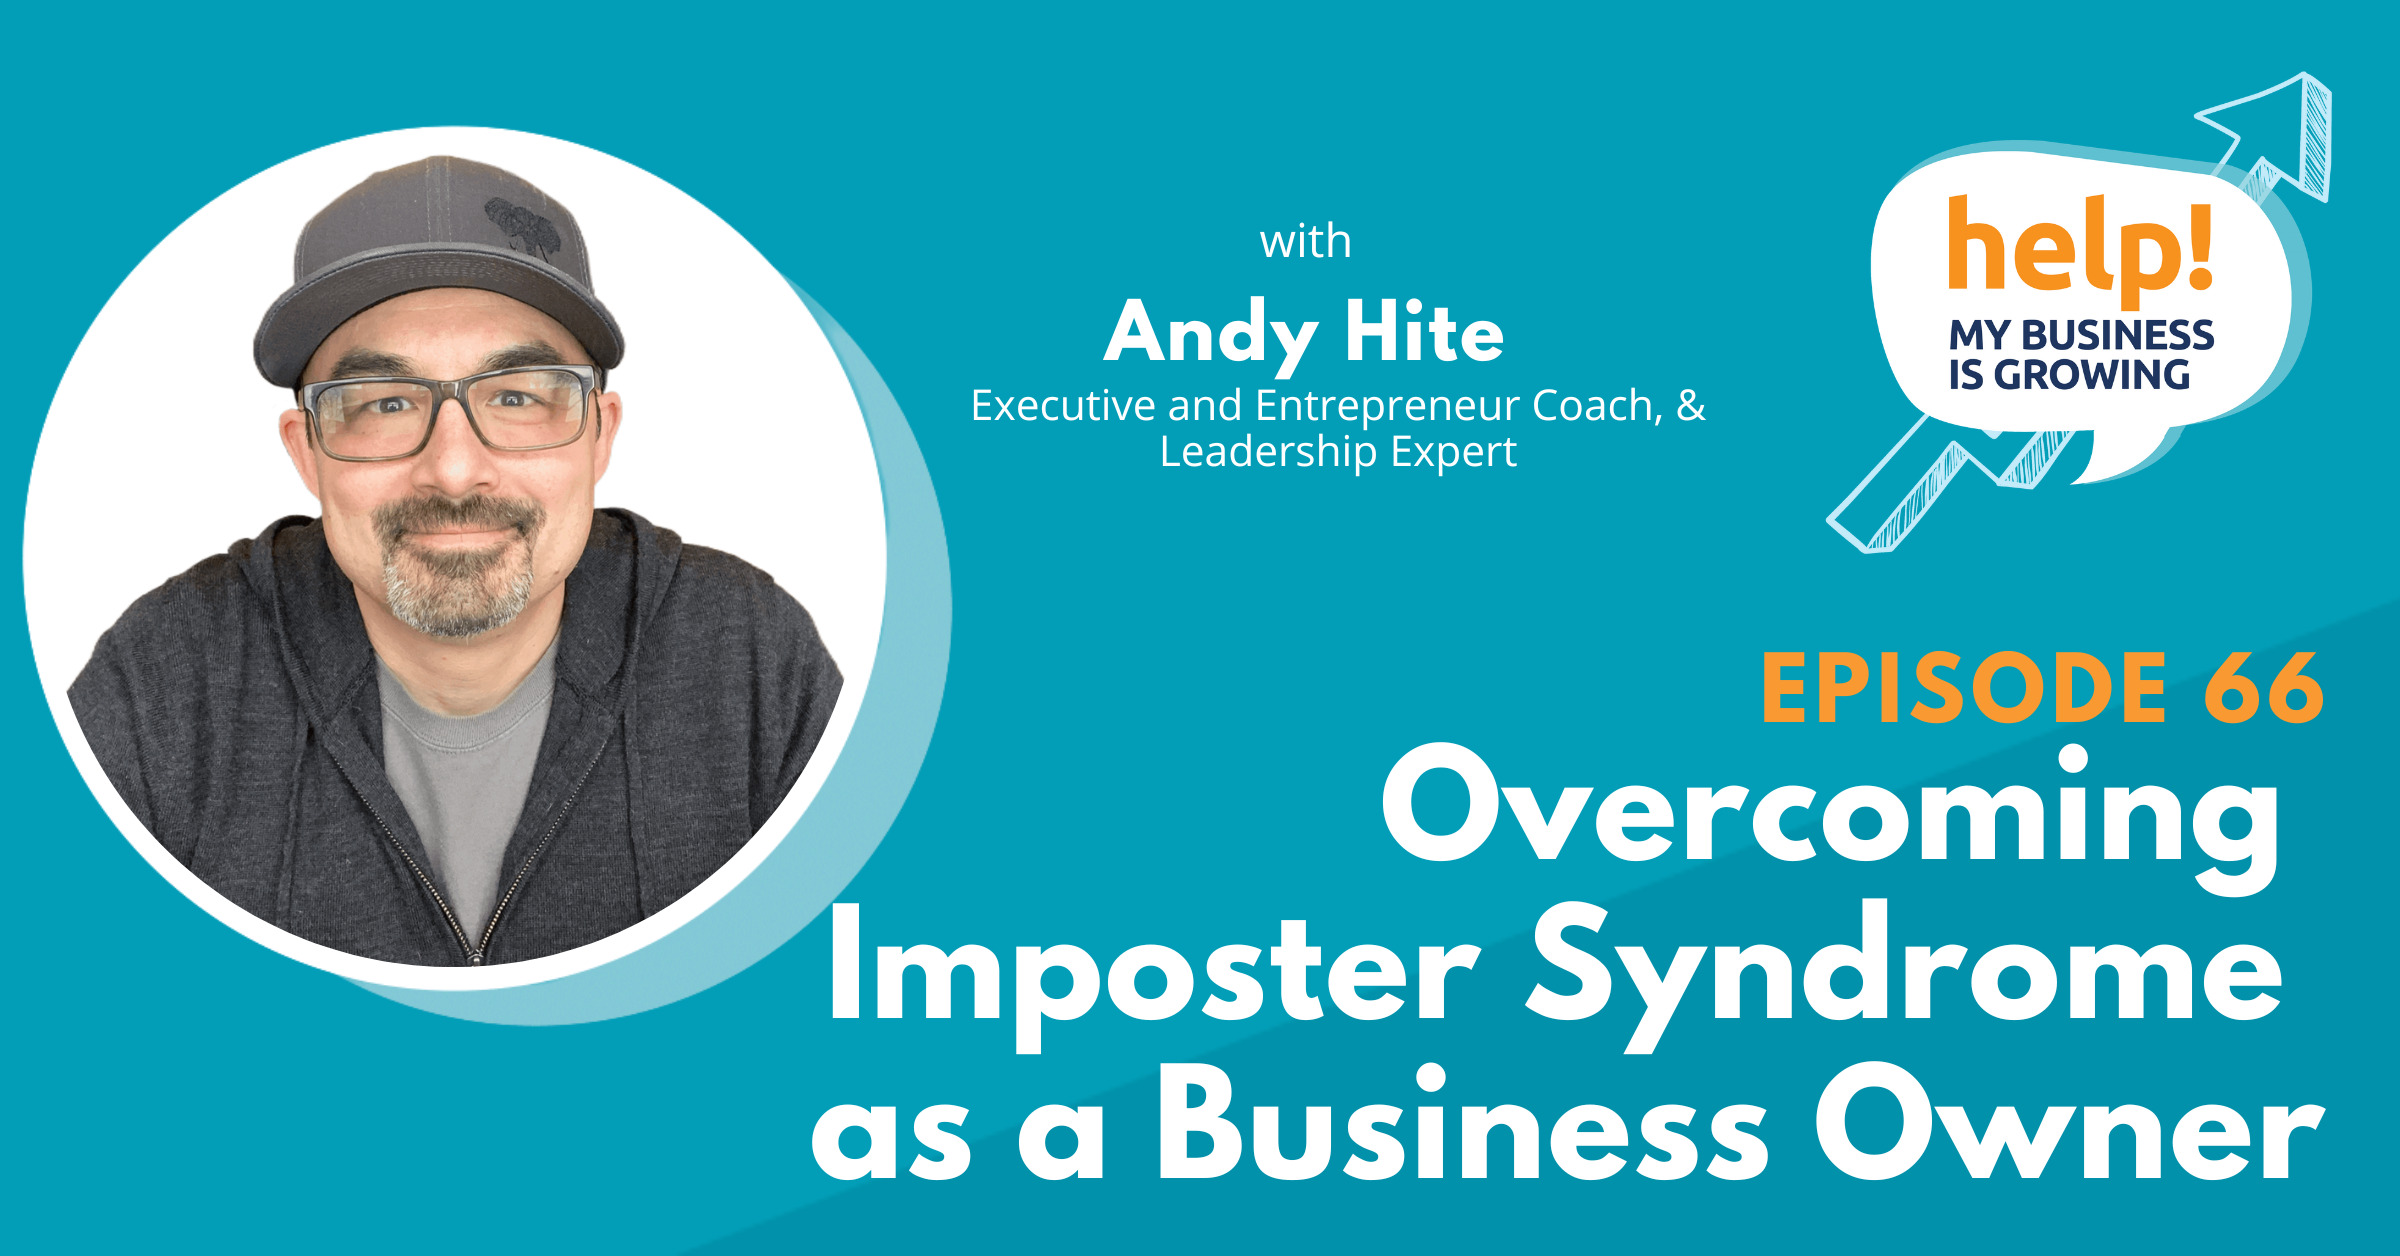 Overcoming Imposter Syndrome as a Business Owner